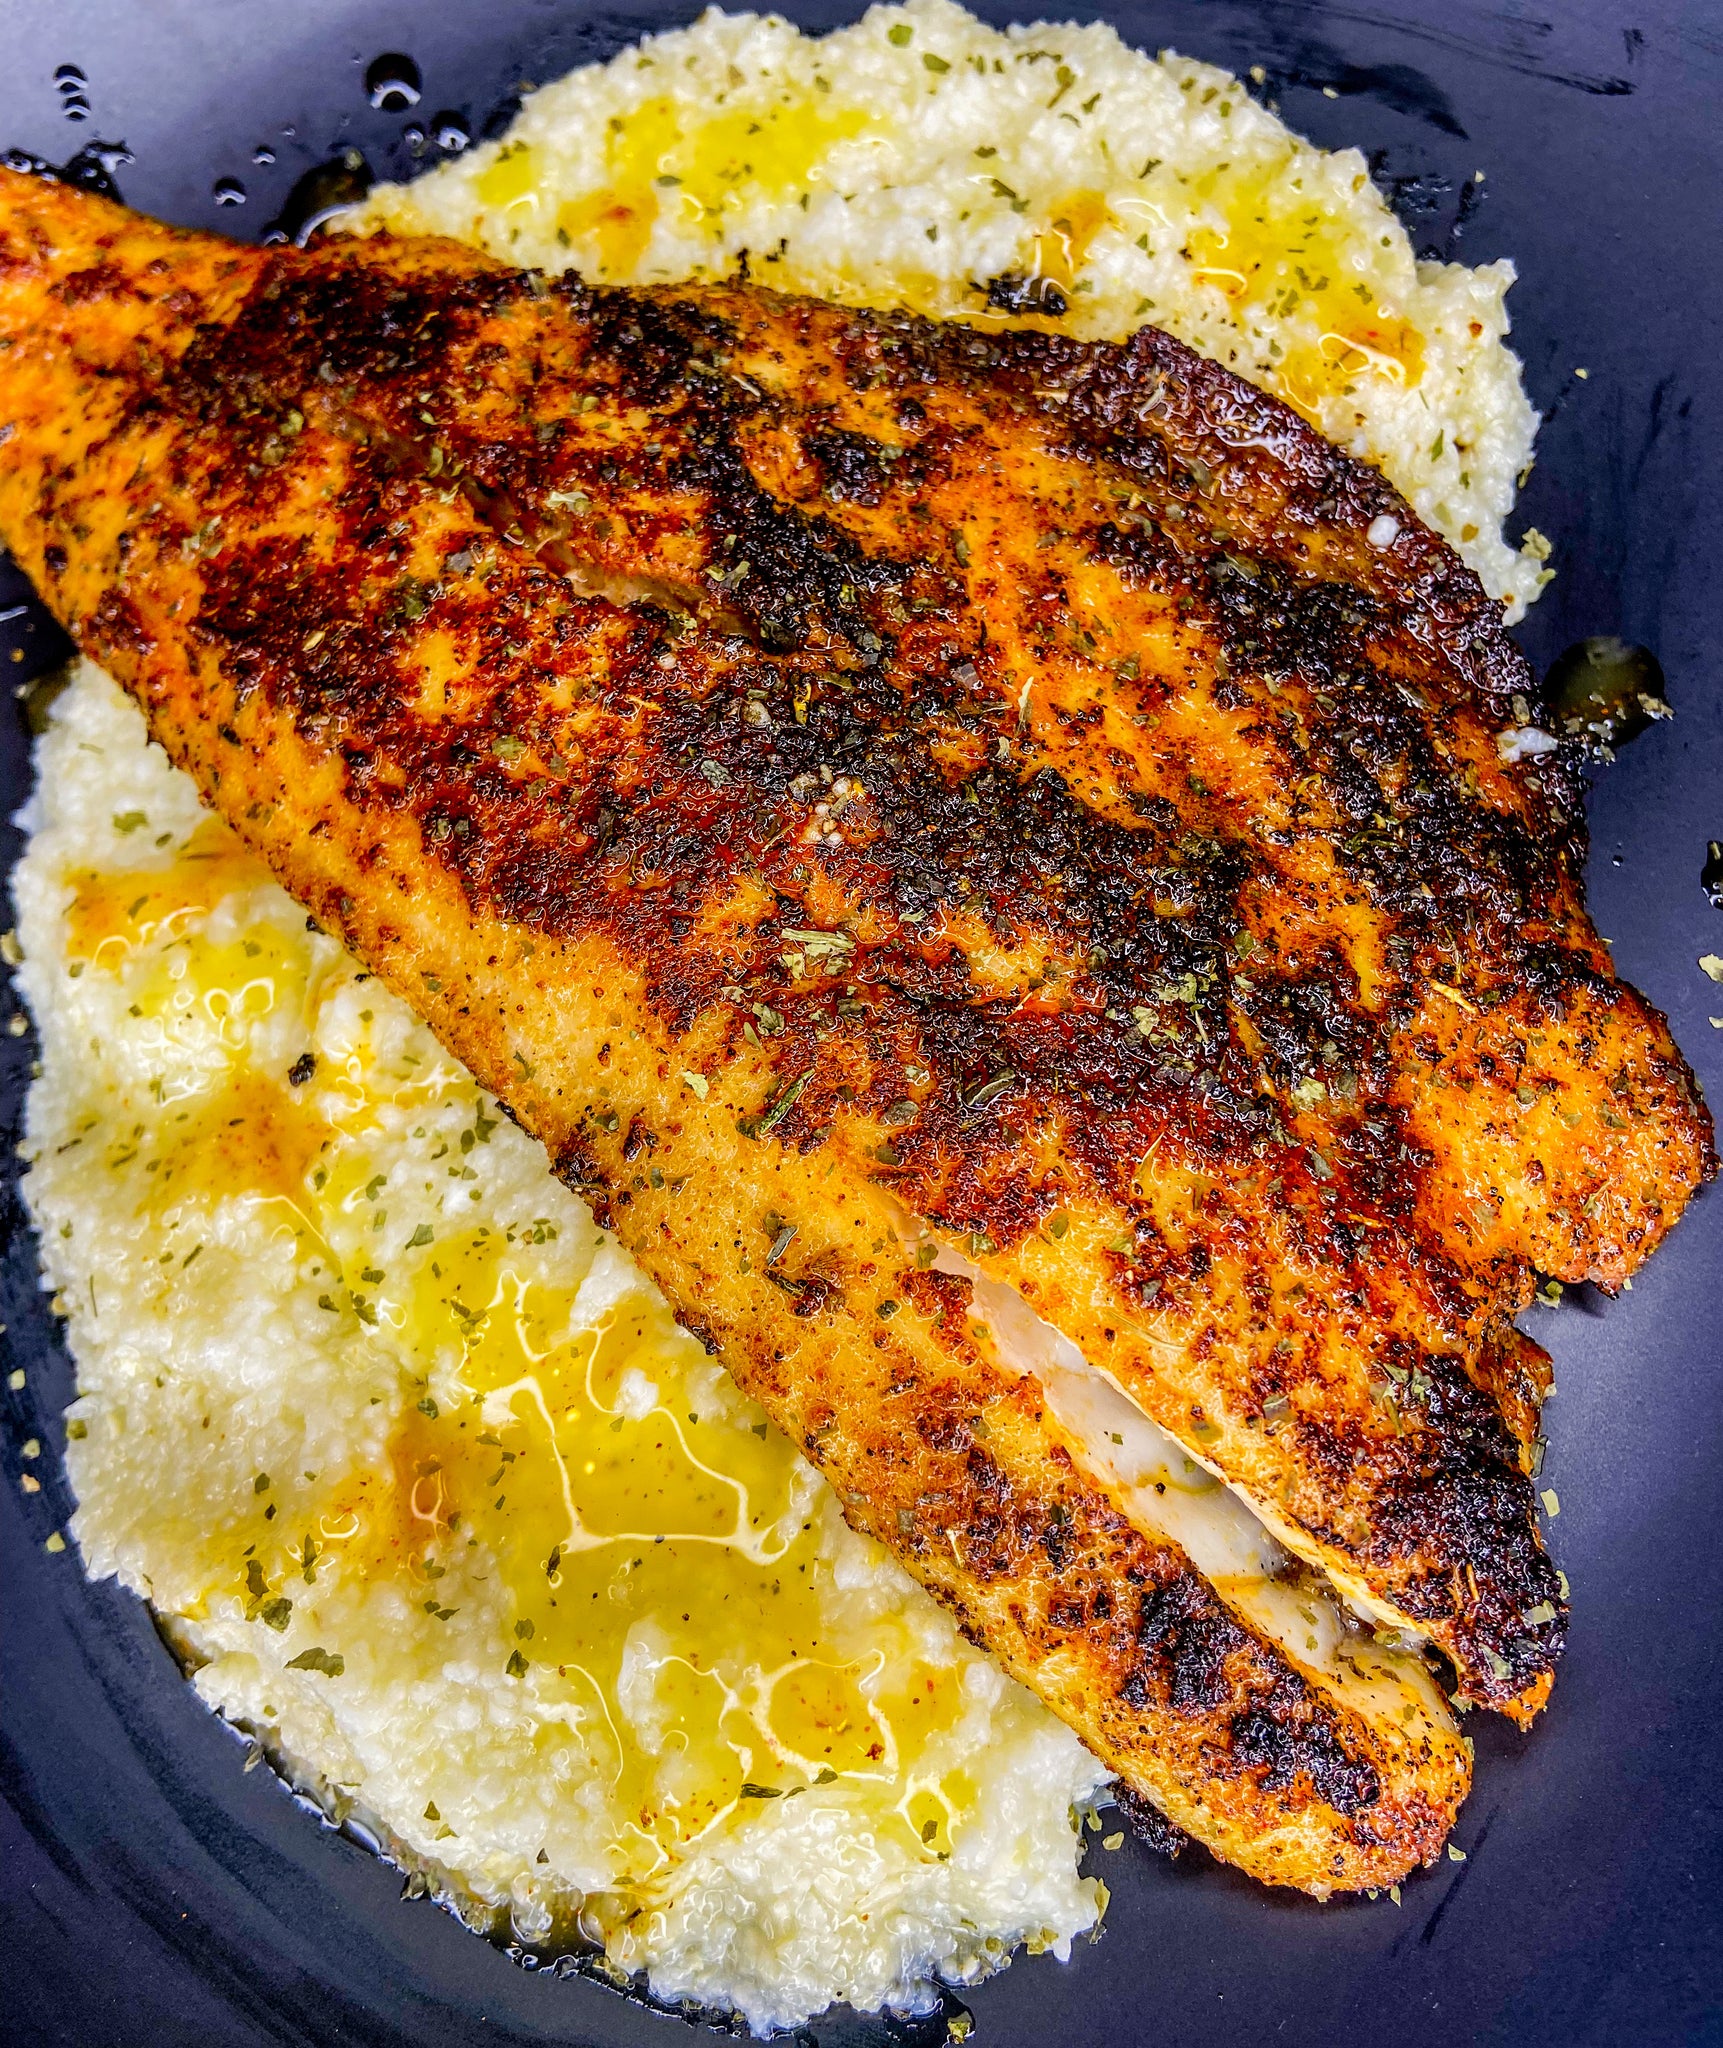 Blackened Fish & Buttered Grits Recipe